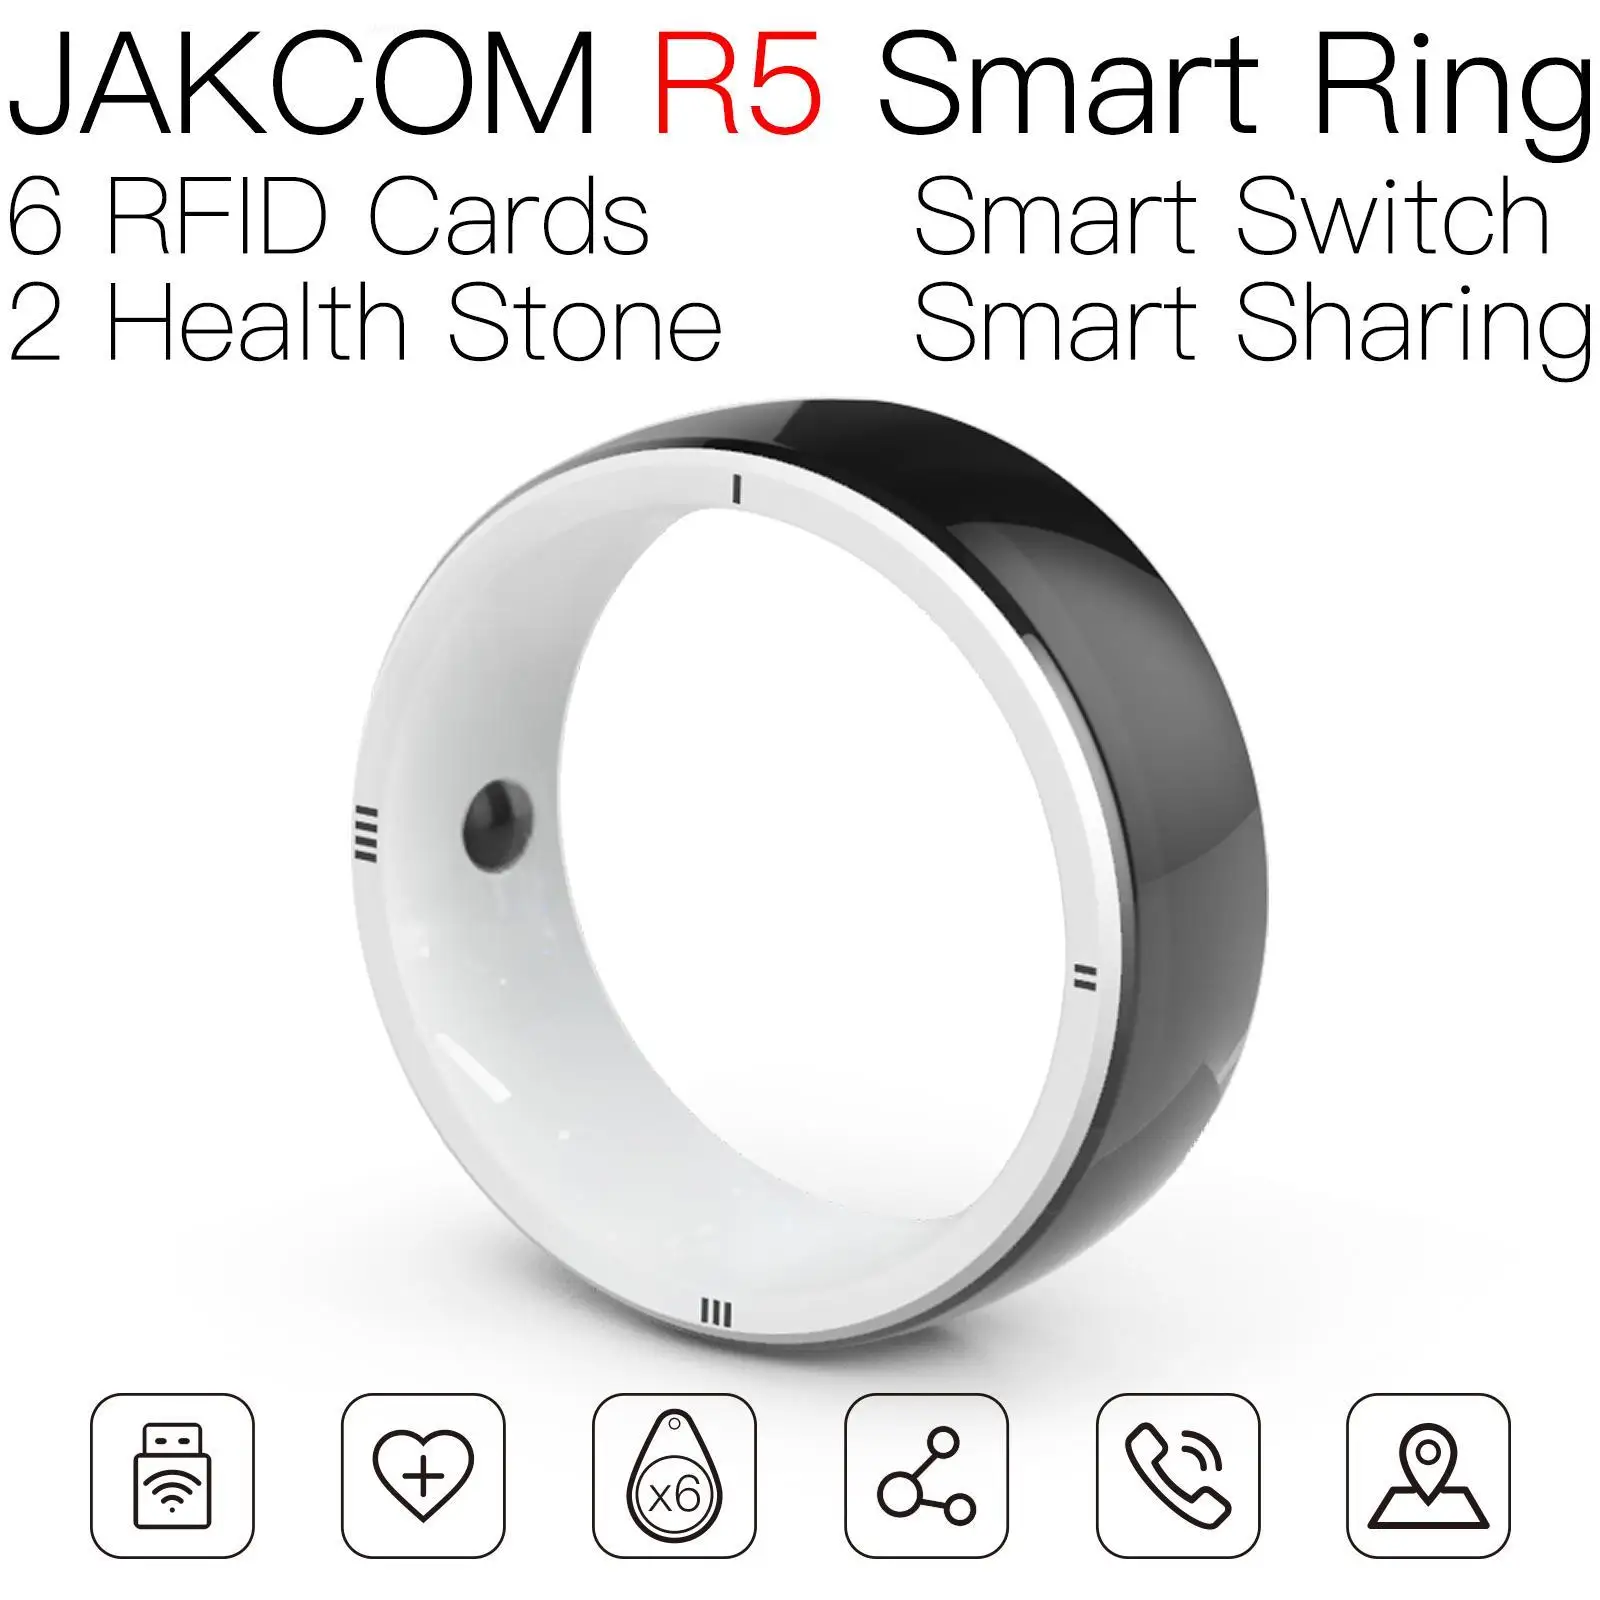 

JAKCOM R5 Smart Ring Match to rfid hf uid modifiable passive key nfc business cards create content opportunities patrol